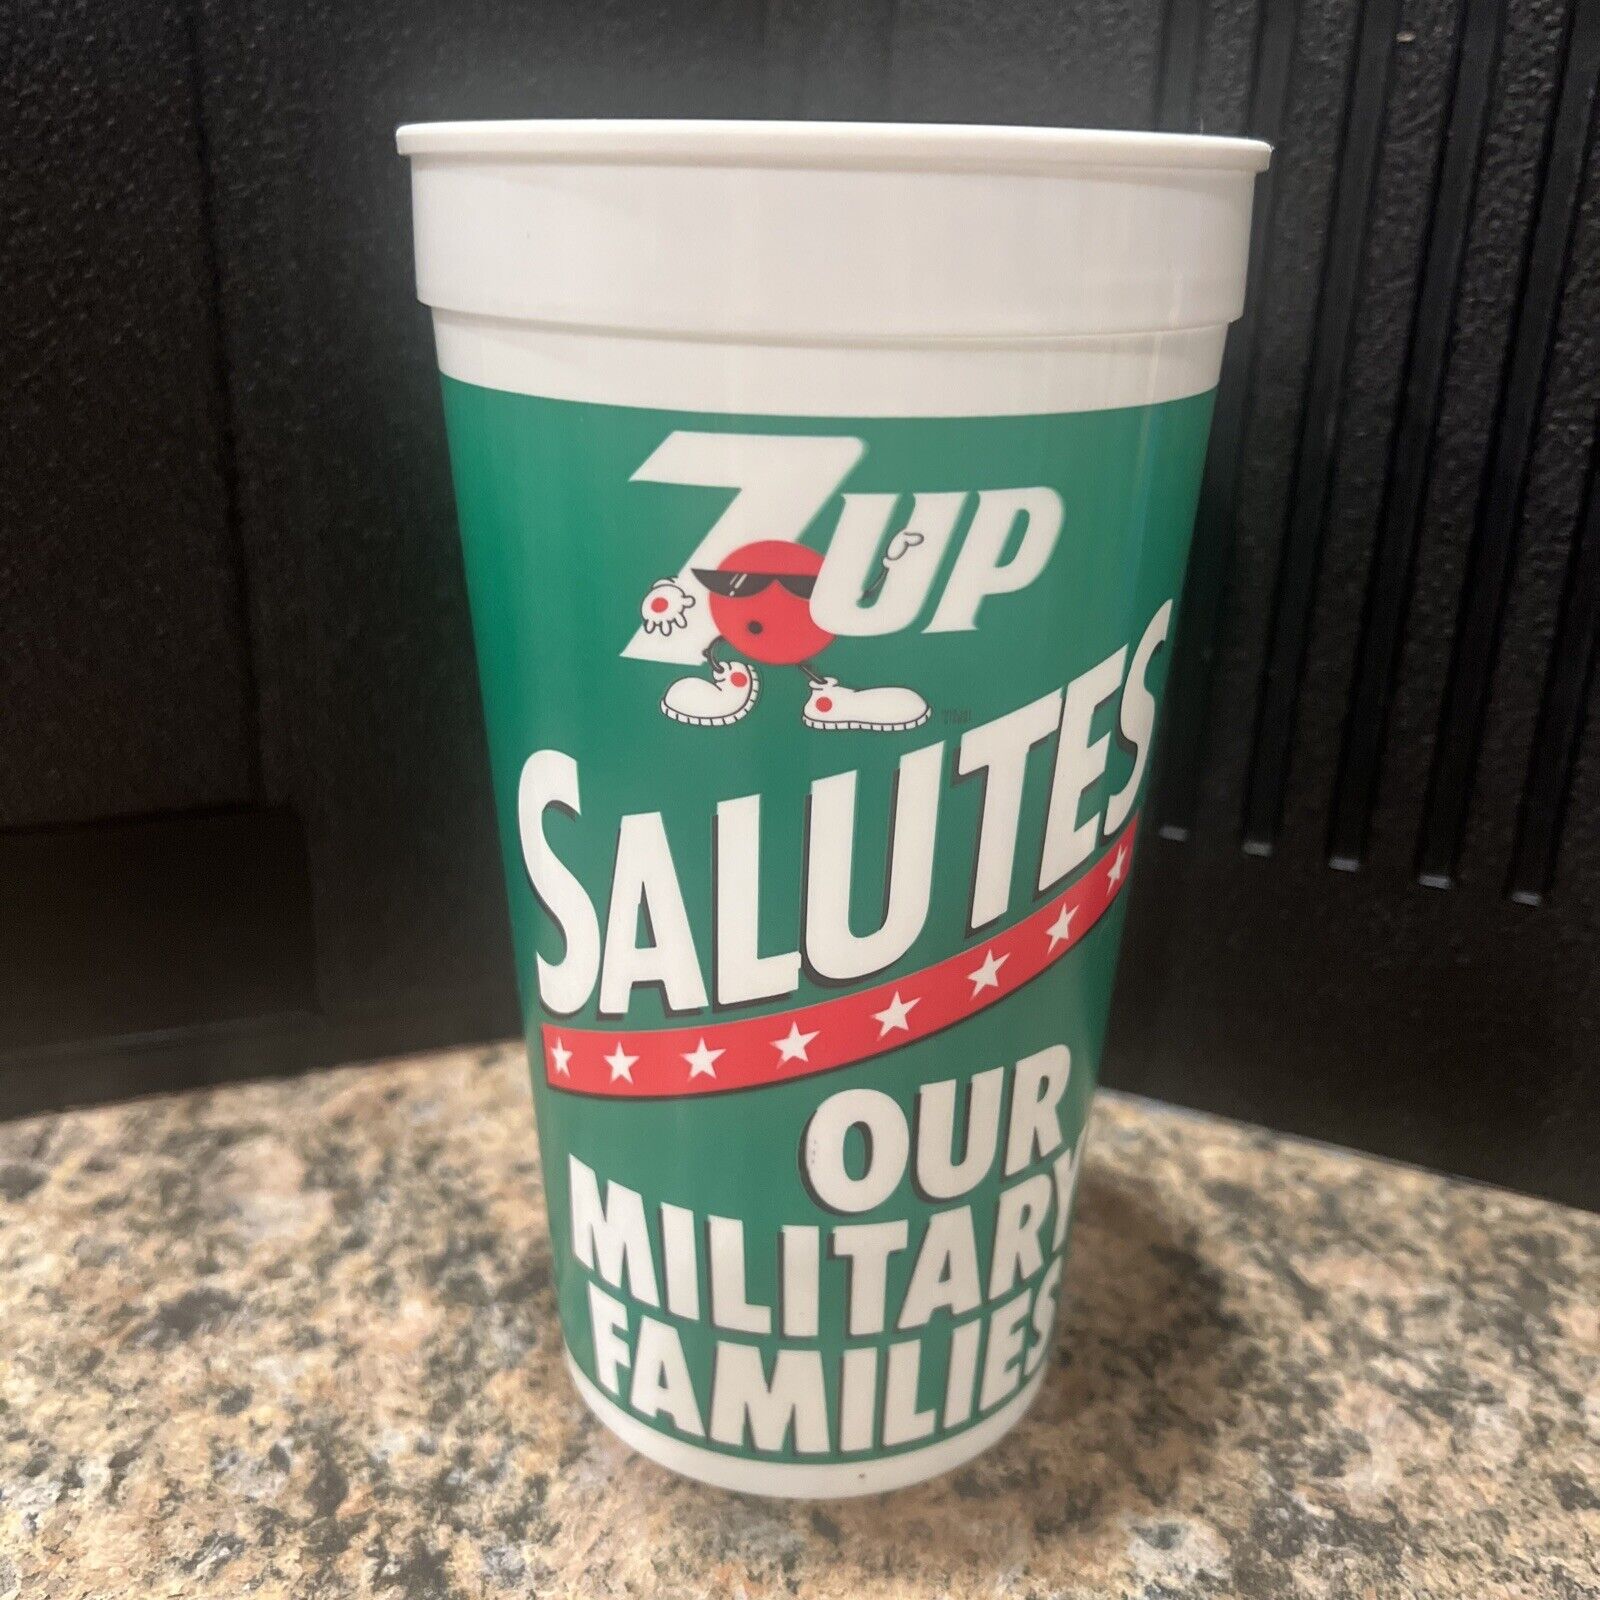 Vintage Rare 7-UP “salutes Our Military Families” 6.75” Plastic Cup. RARE